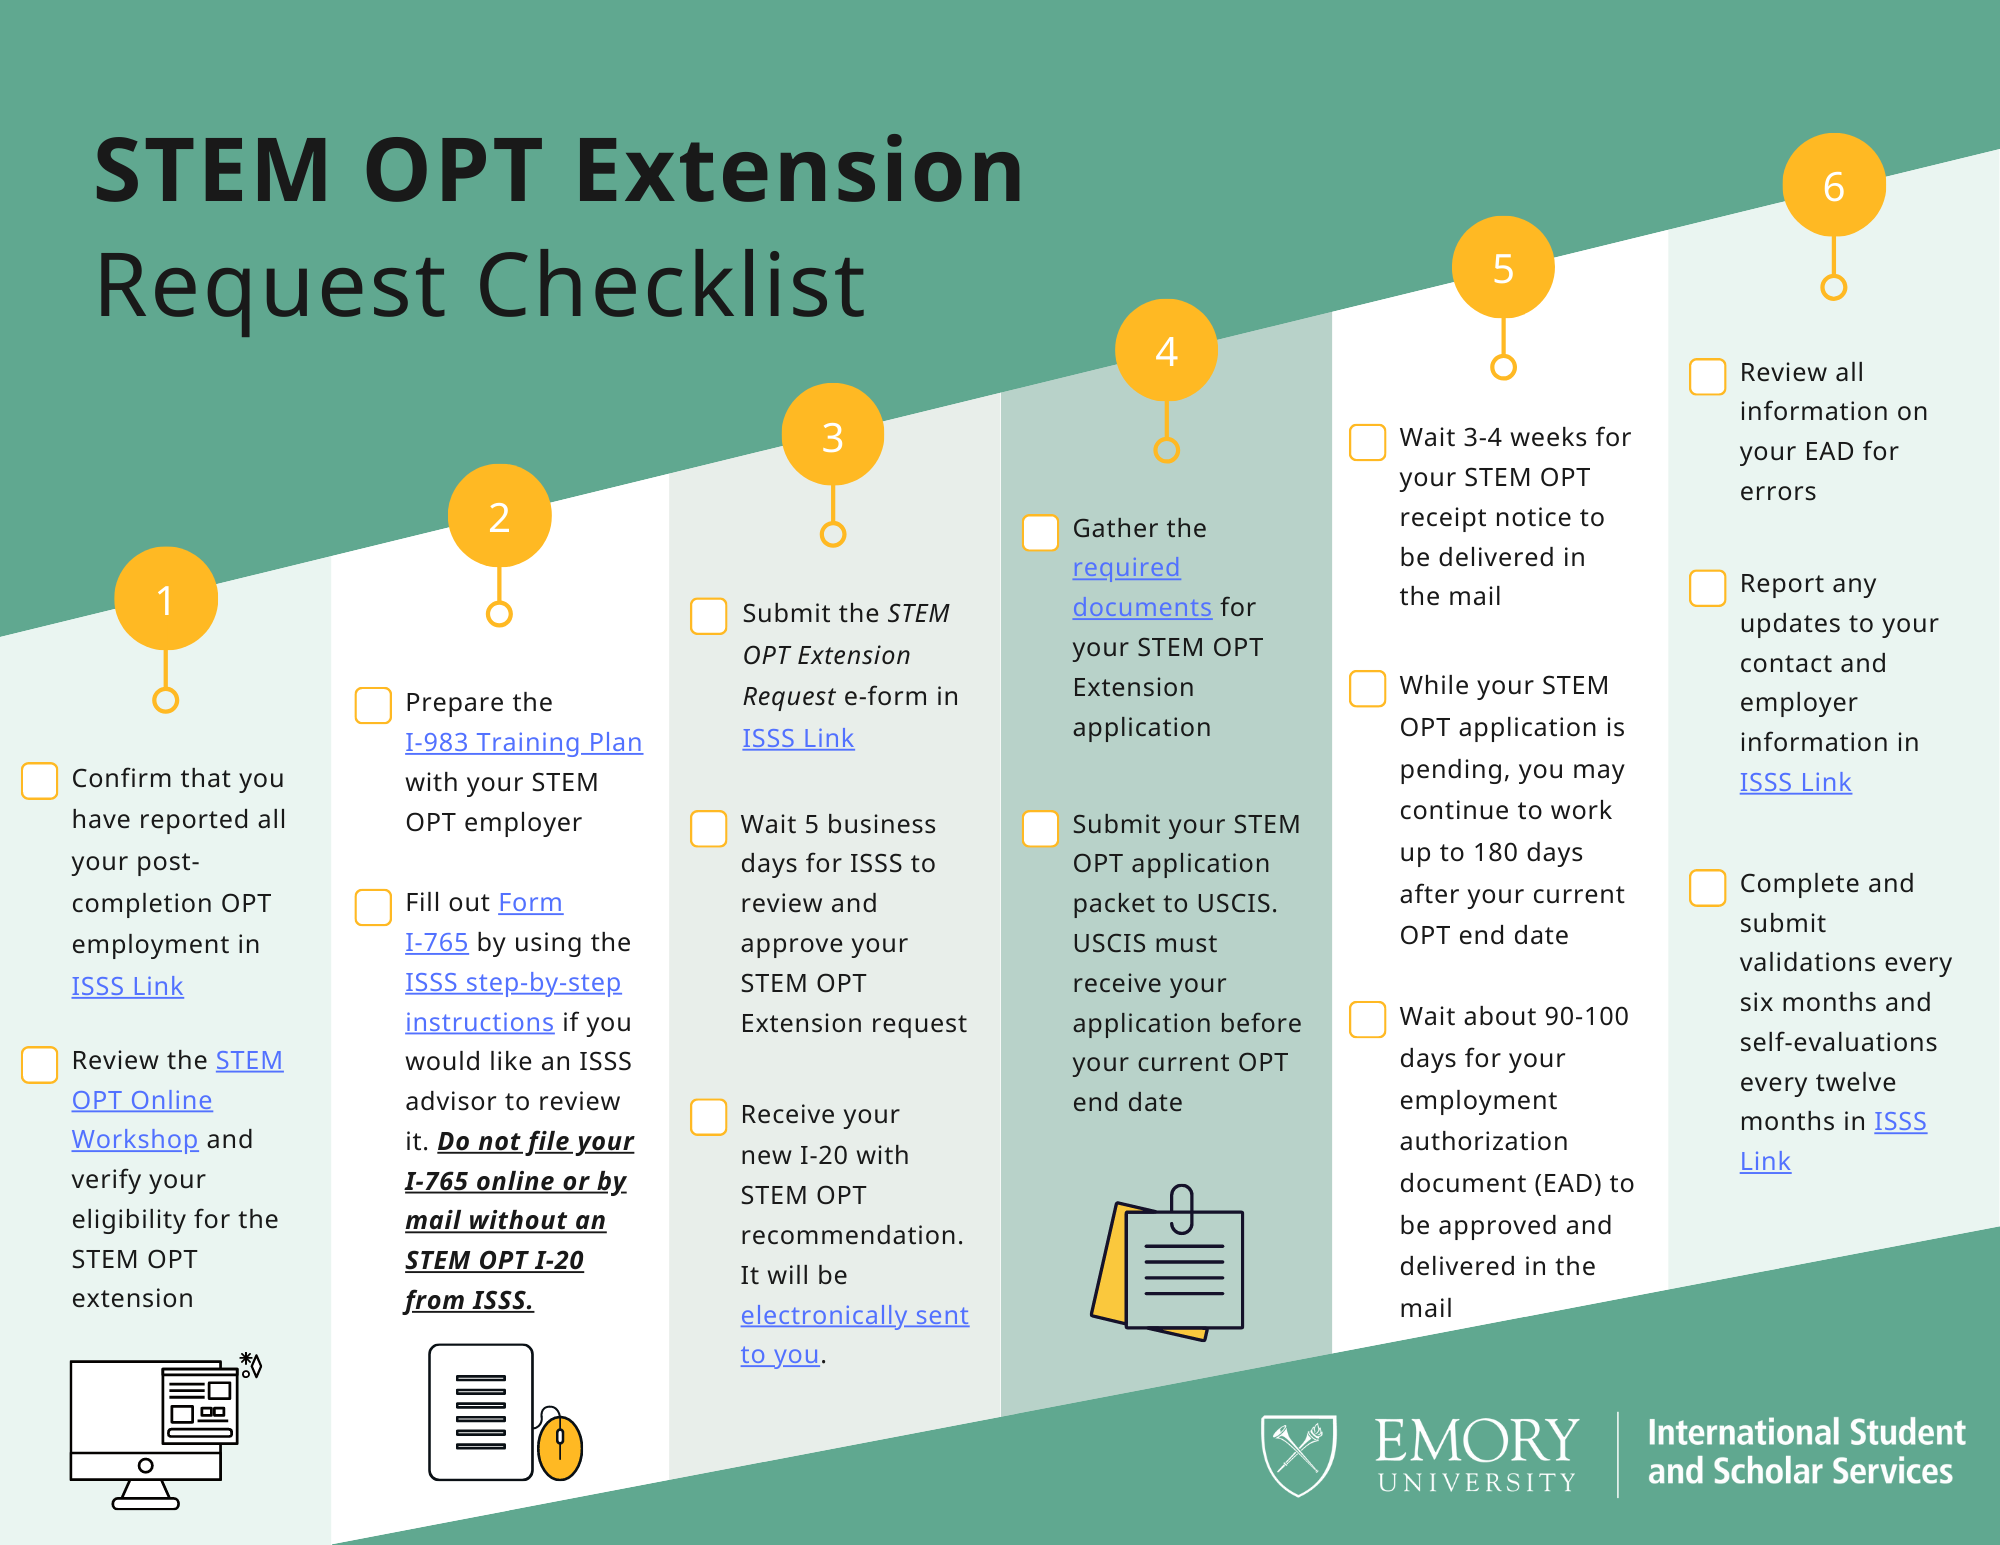 https://isss.emory.edu/documents/STEM%20OPT%20Extension%20Request%20Checklist.png